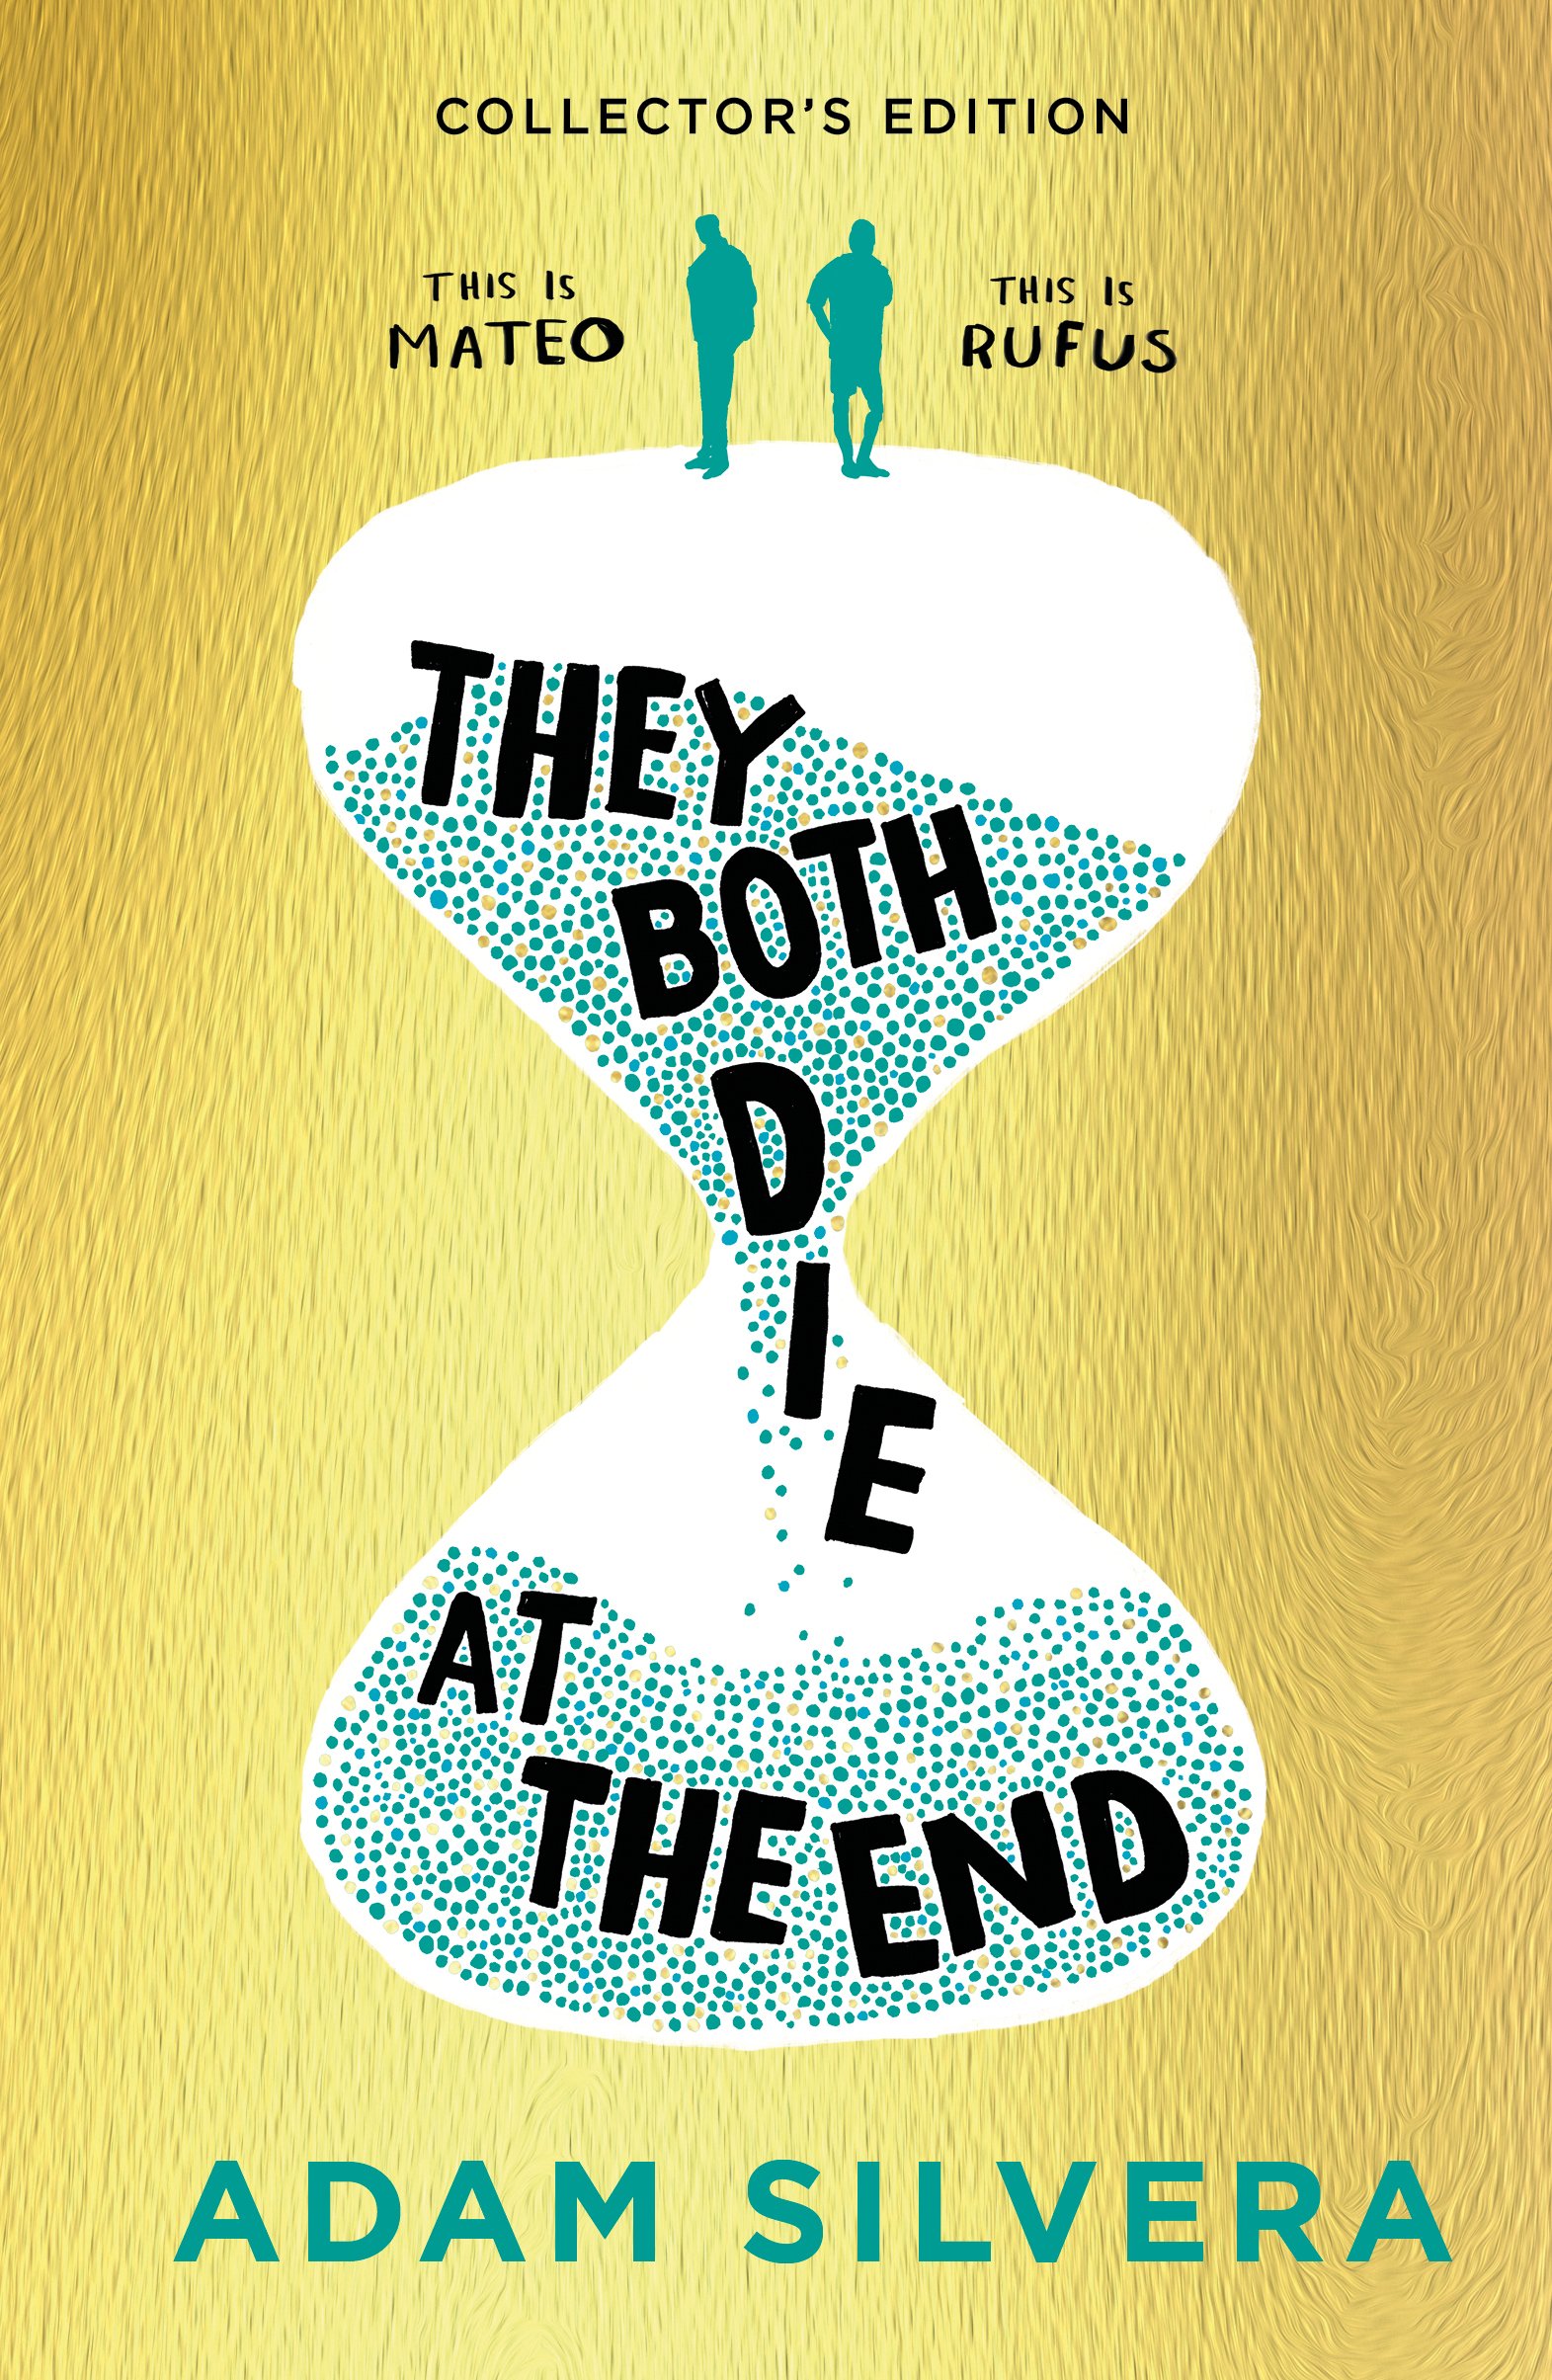 THEY BOTH DIE AT THE END — ADAM SILVERA